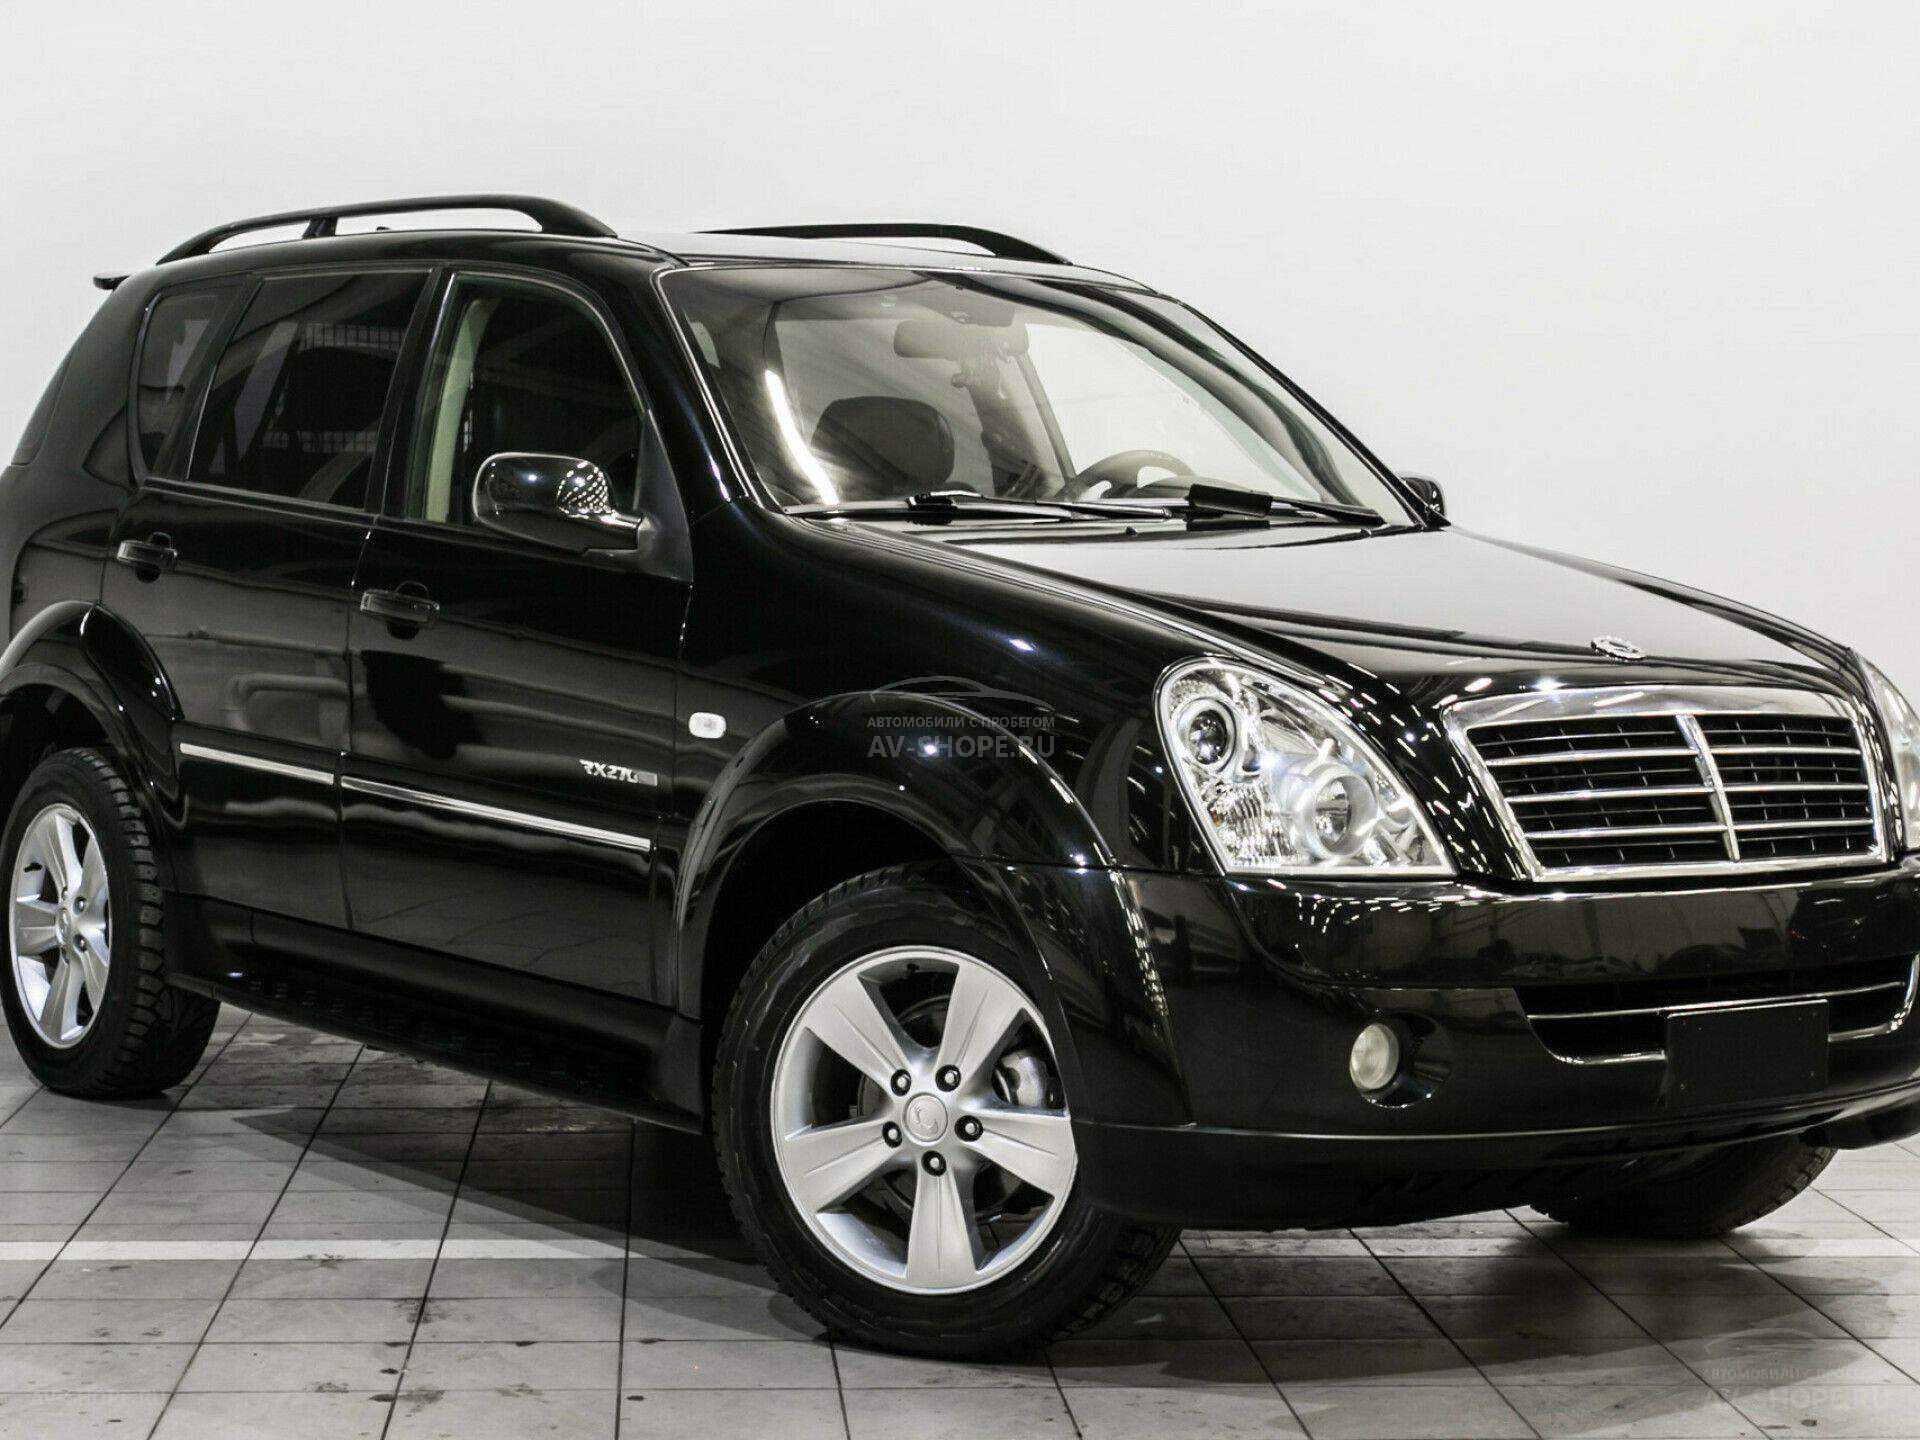 Санг енг 2008 года. SSANGYONG Rexton 2 2008. ССАНГЙОНГ Рекстон 2008. SSANGYONG Rexton 2.7. Саньенг Рекстон 2008 2.7 дизель.